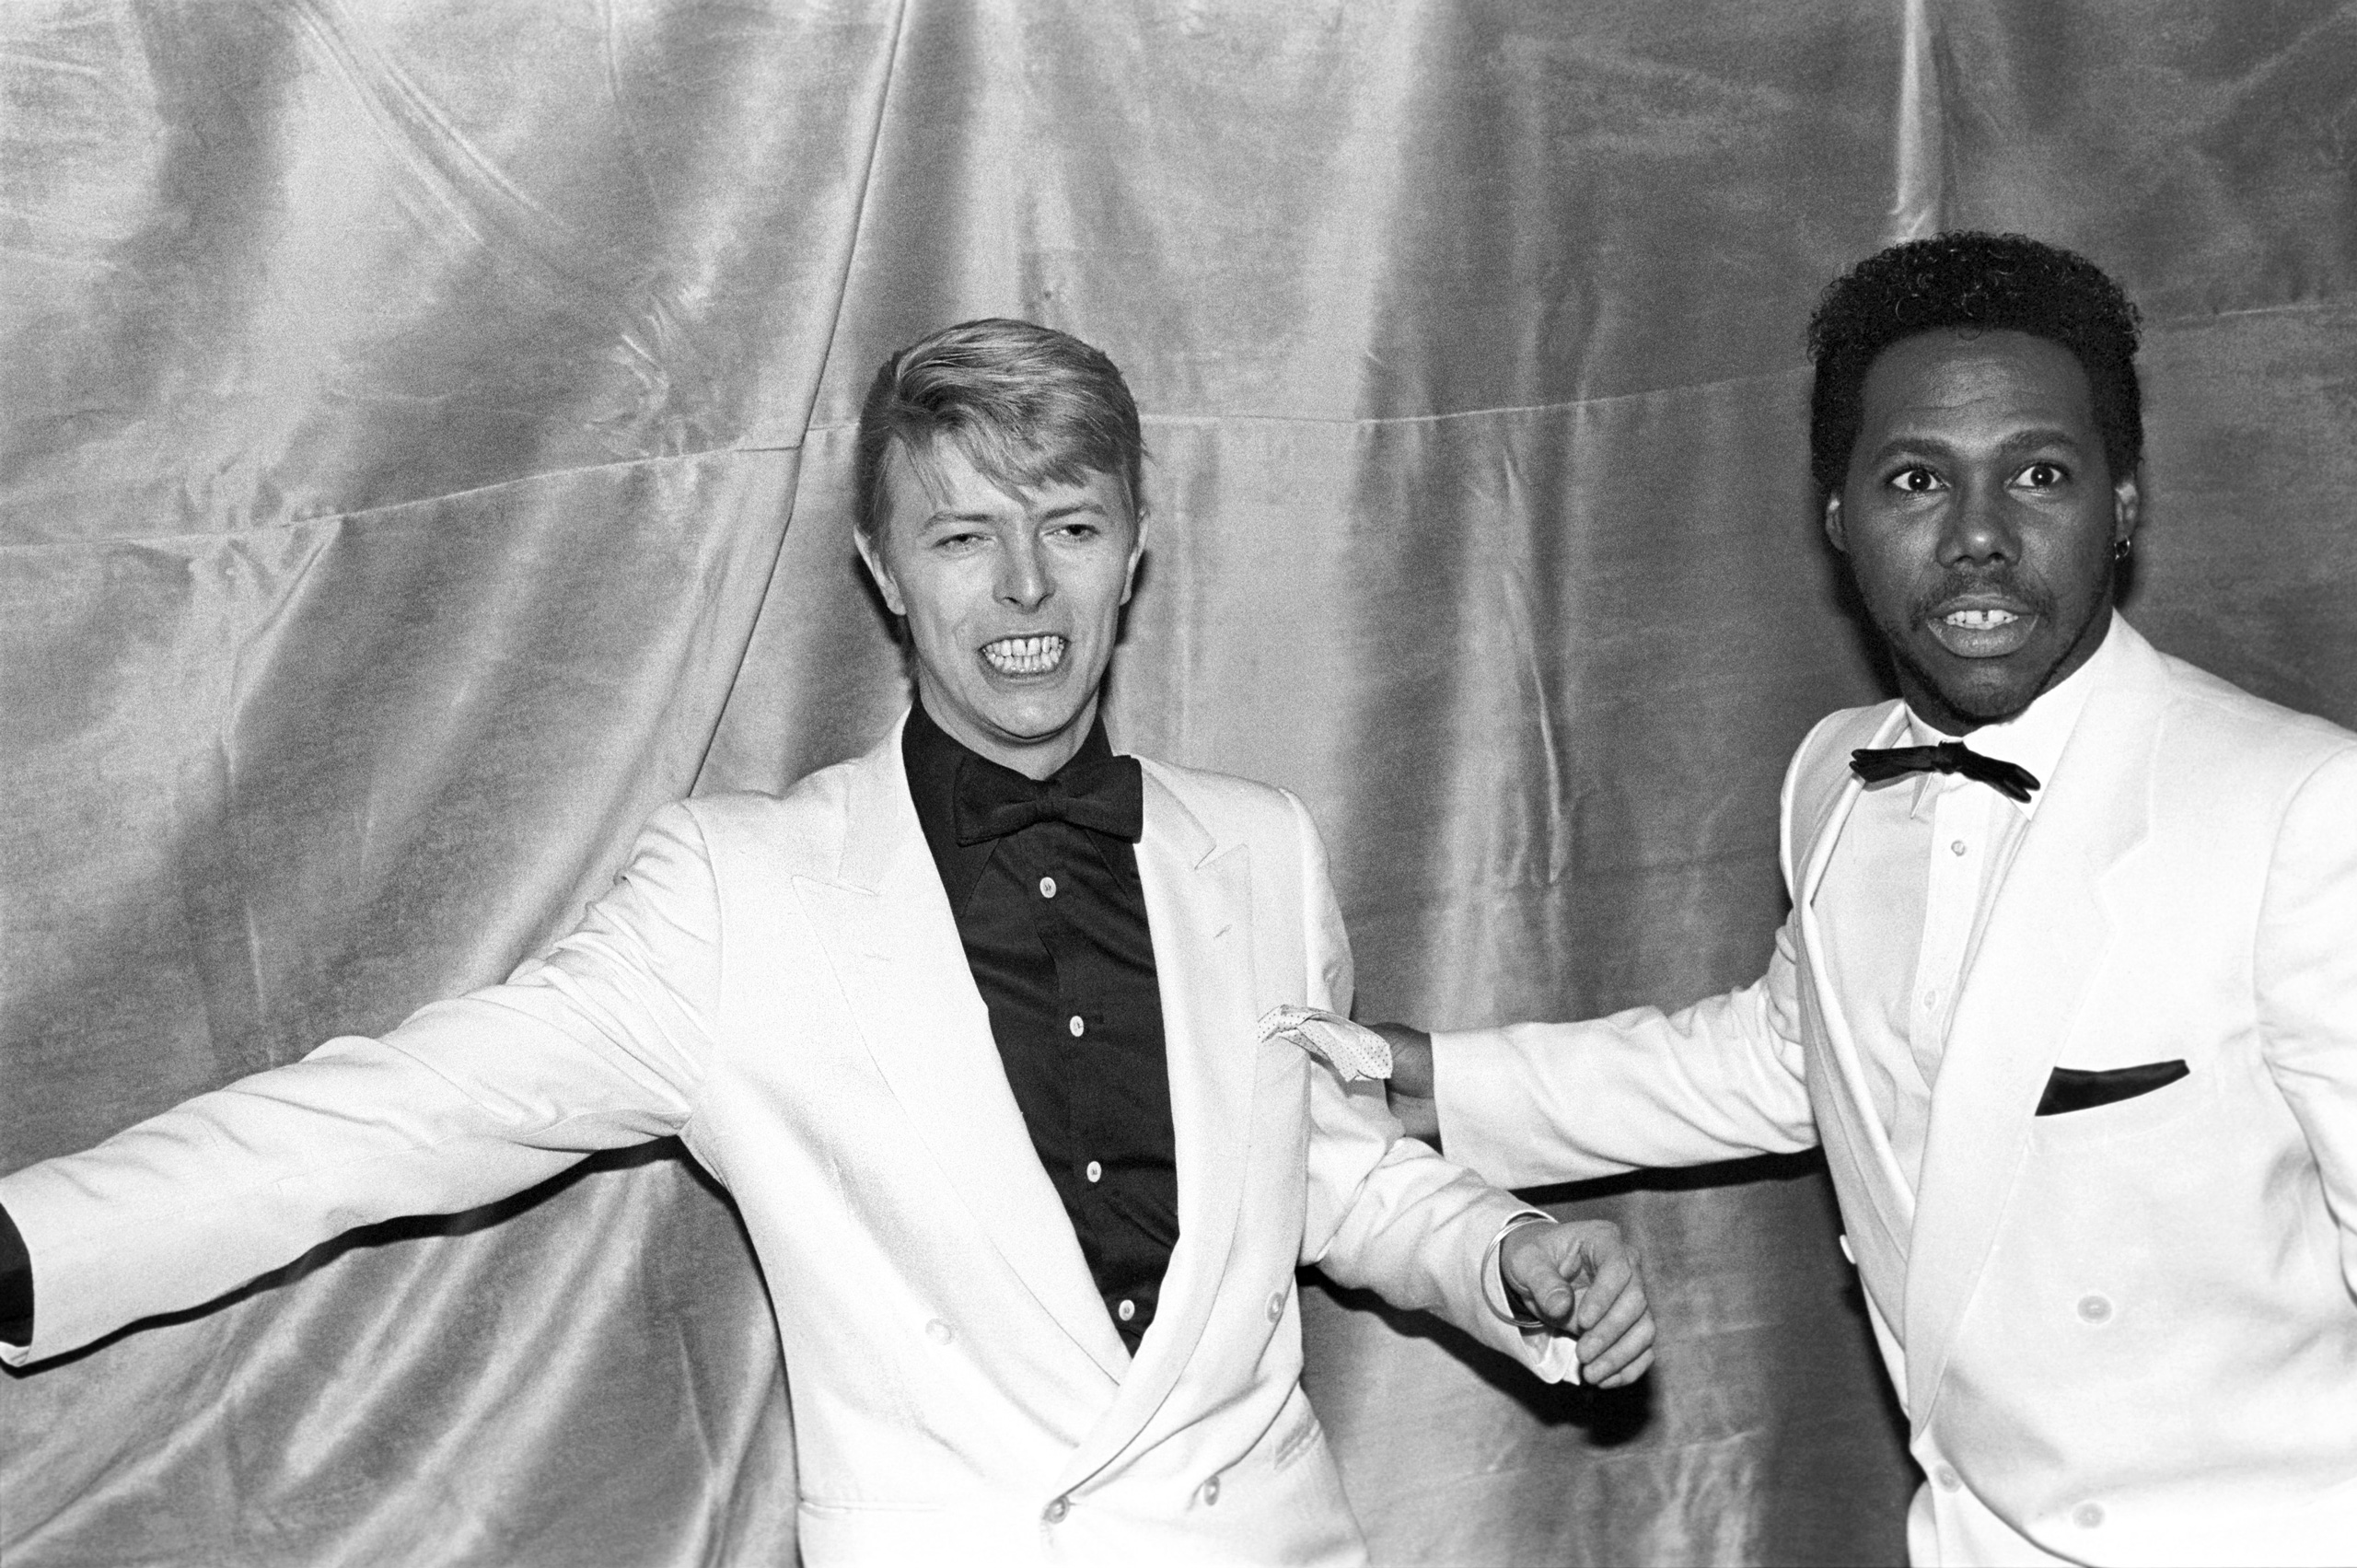 David Bowie with Nile Rodgers of Chic at the Frankie Crocker Awards at the Savoy in New York, on 21st January 21 1983. (Photo by Ebet Roberts/Redferns)